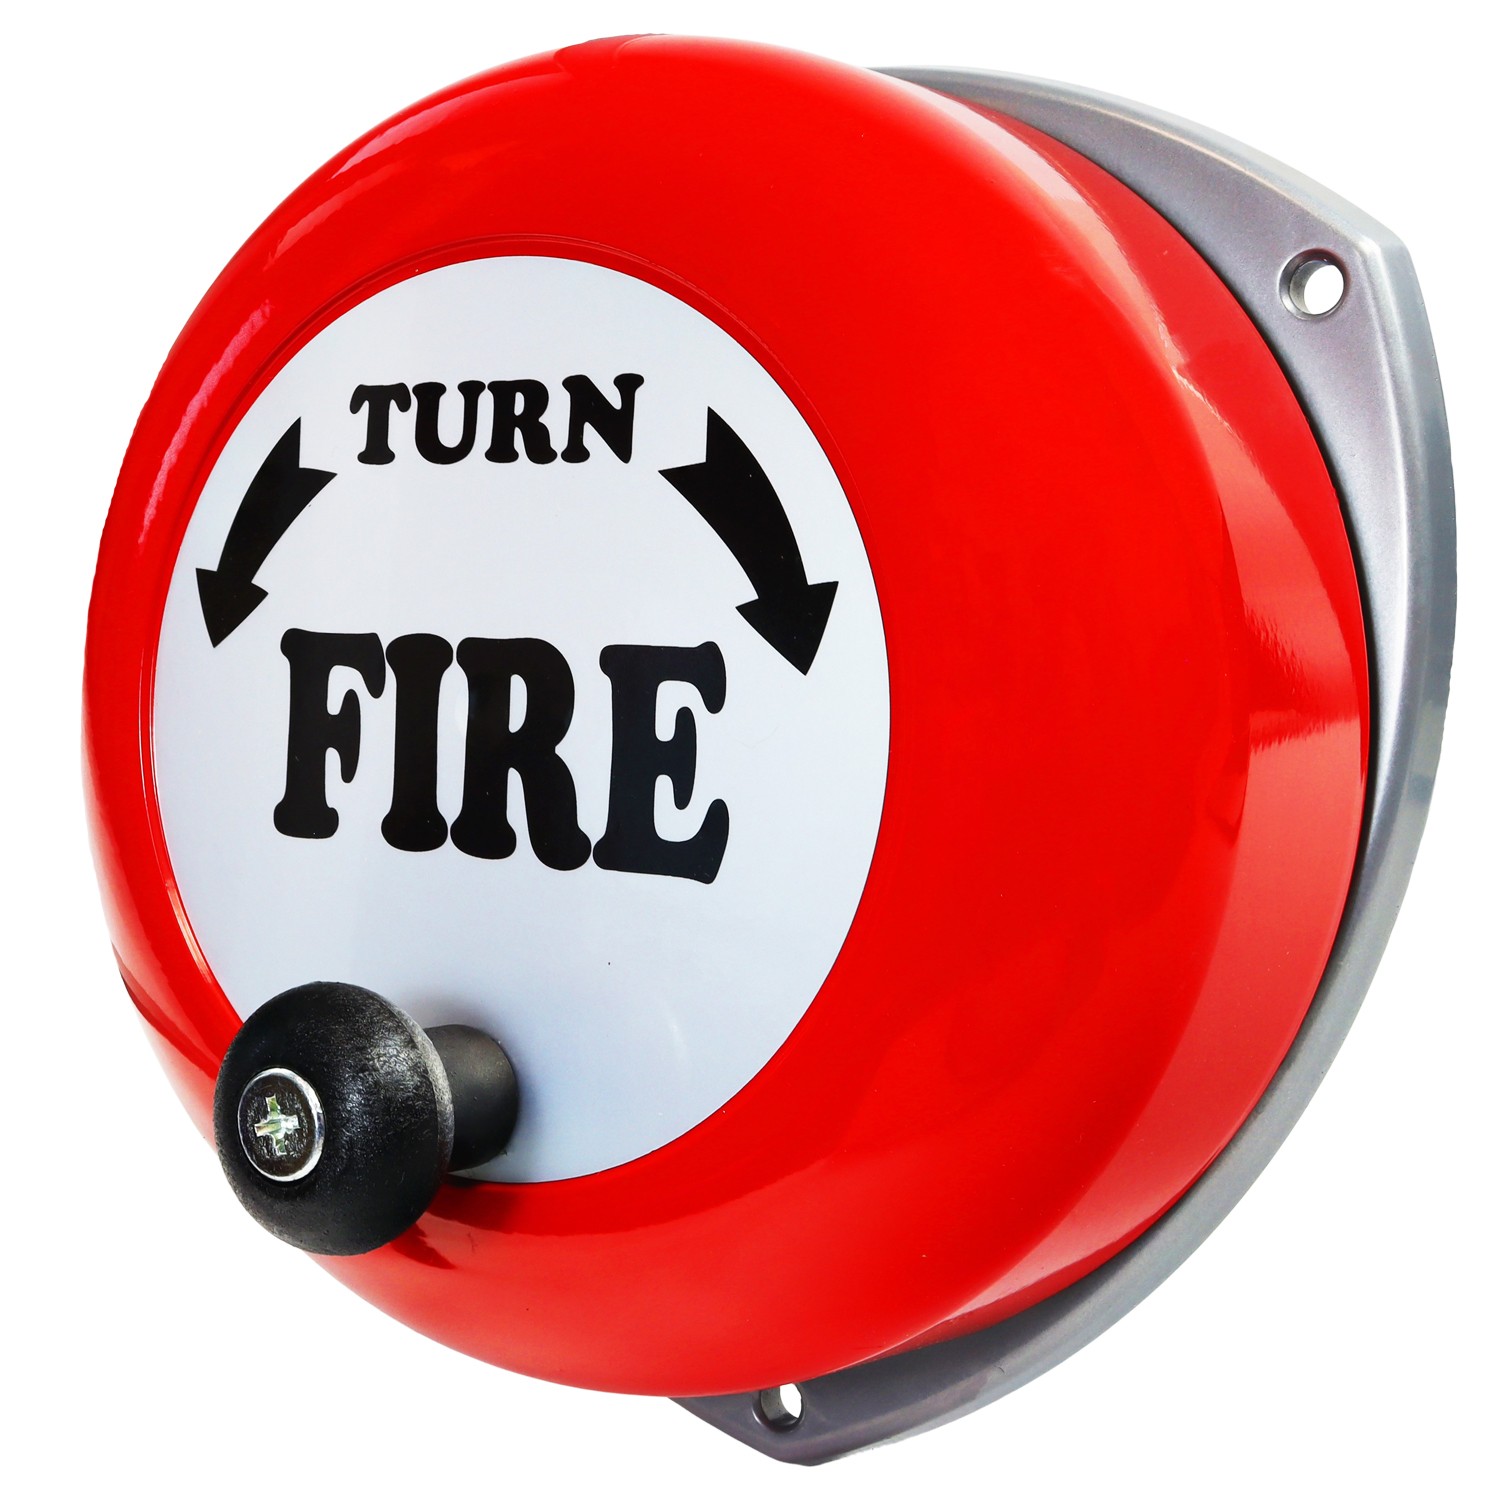 Campsite Fire Safety Bundle - Manual Rotary Alarm Bell